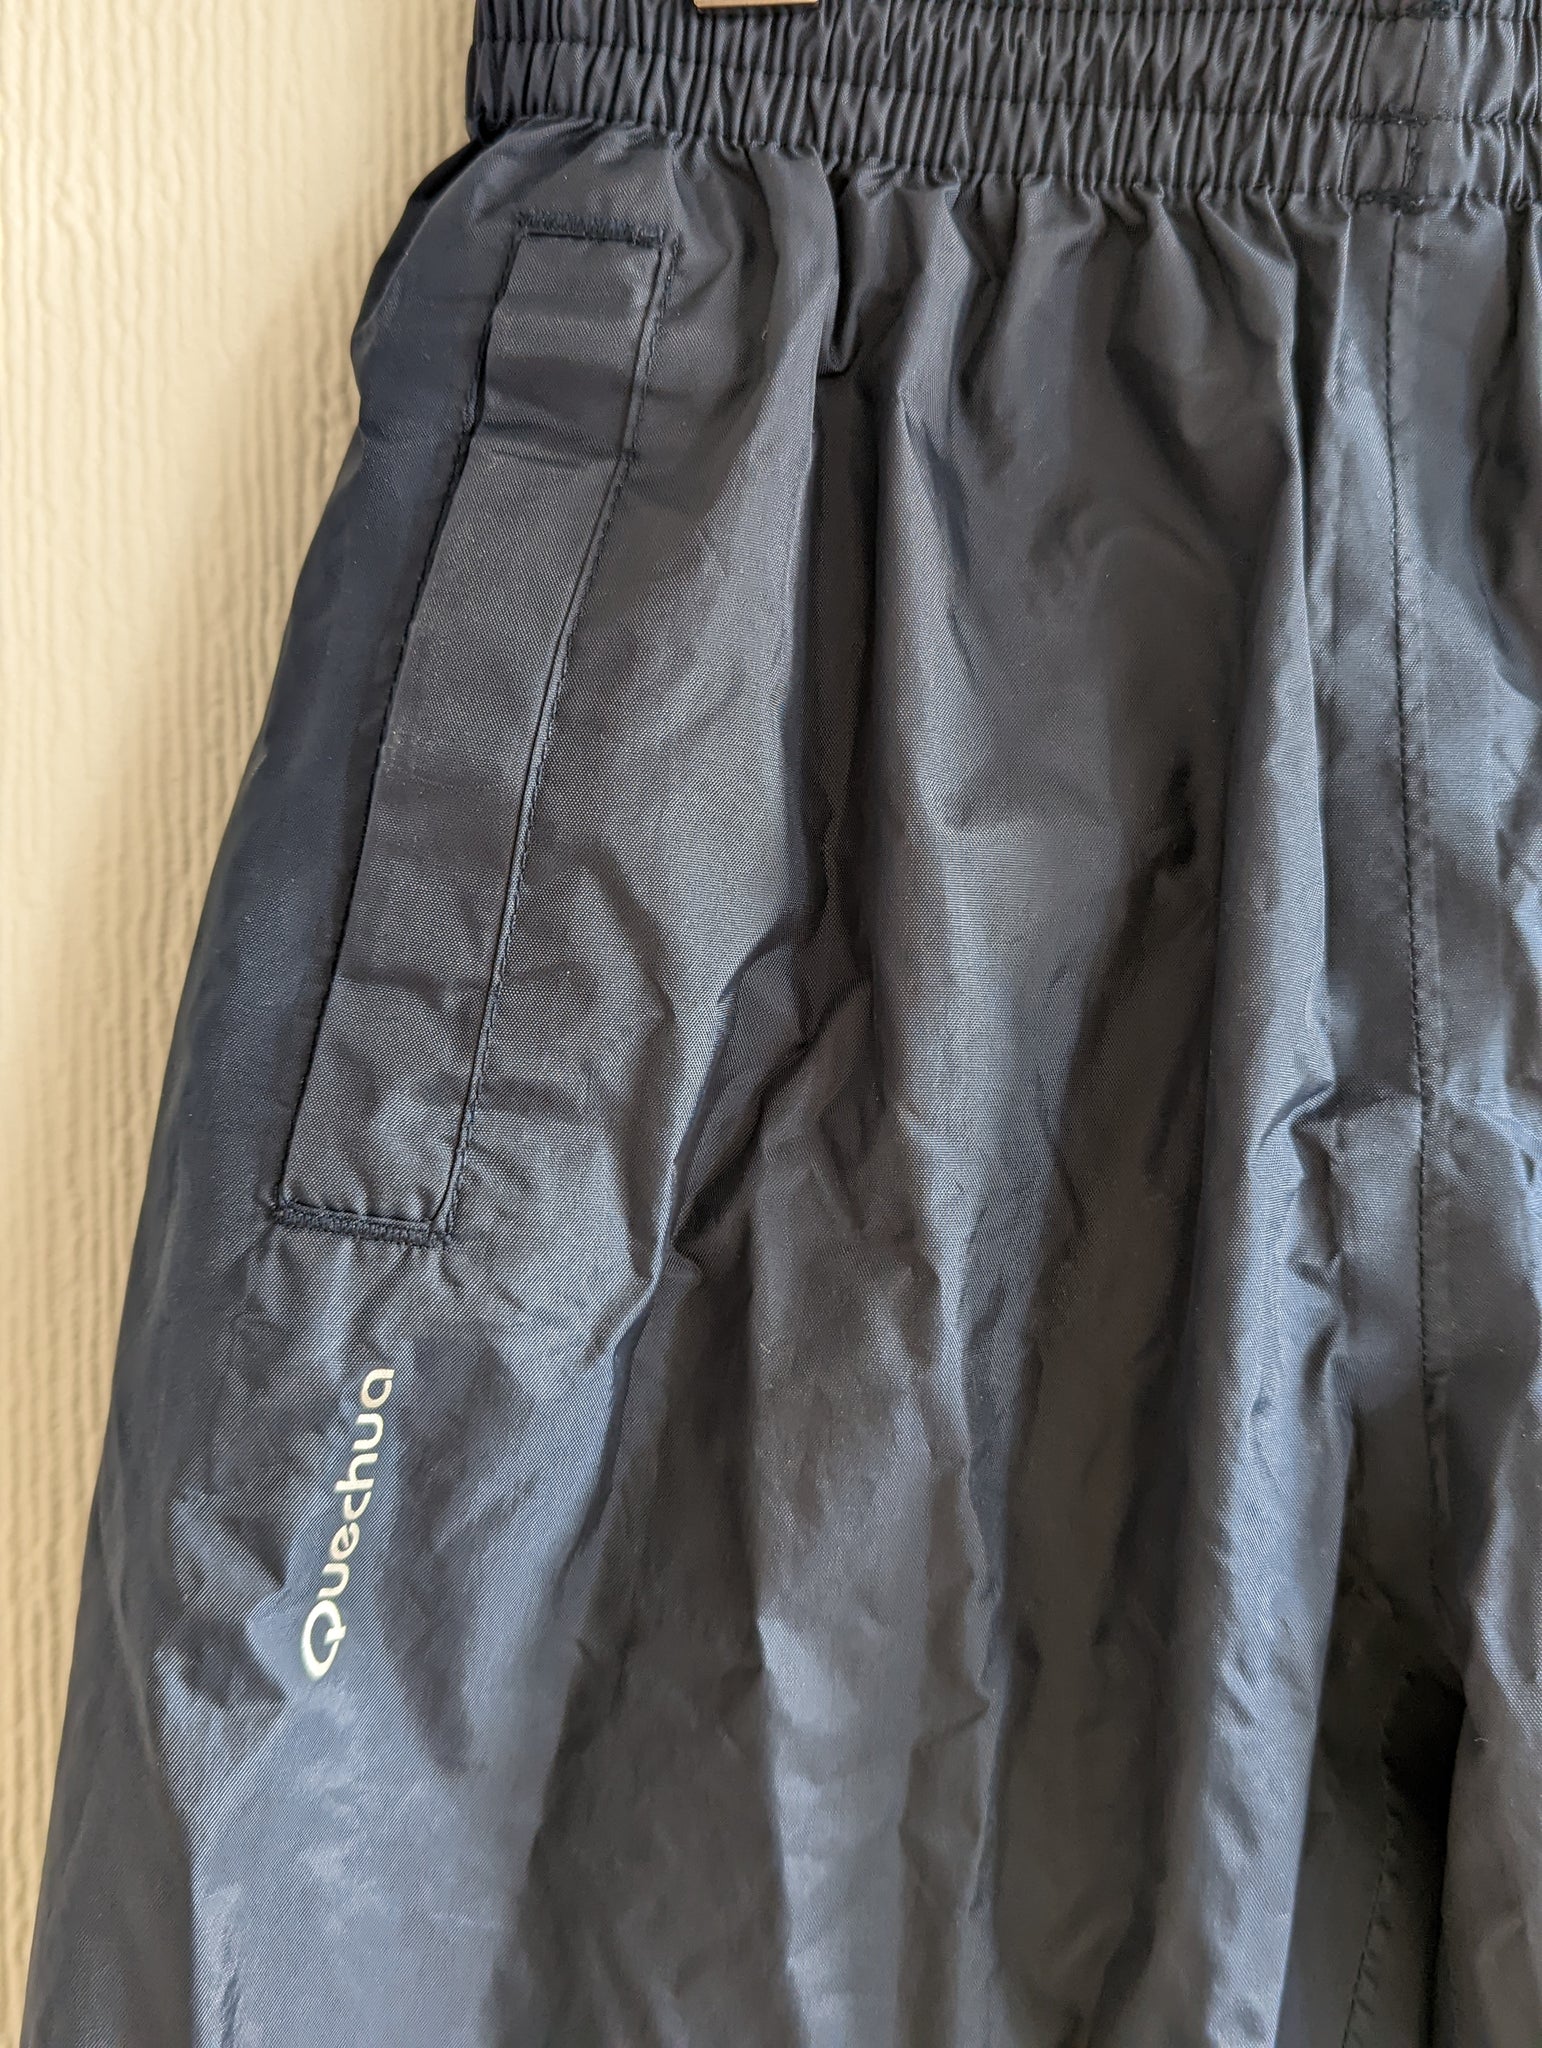 Still STRUGLING to fold??? | Packing and Unpacking | QUECHUA NH100 RAIN  JACKET - YouTube